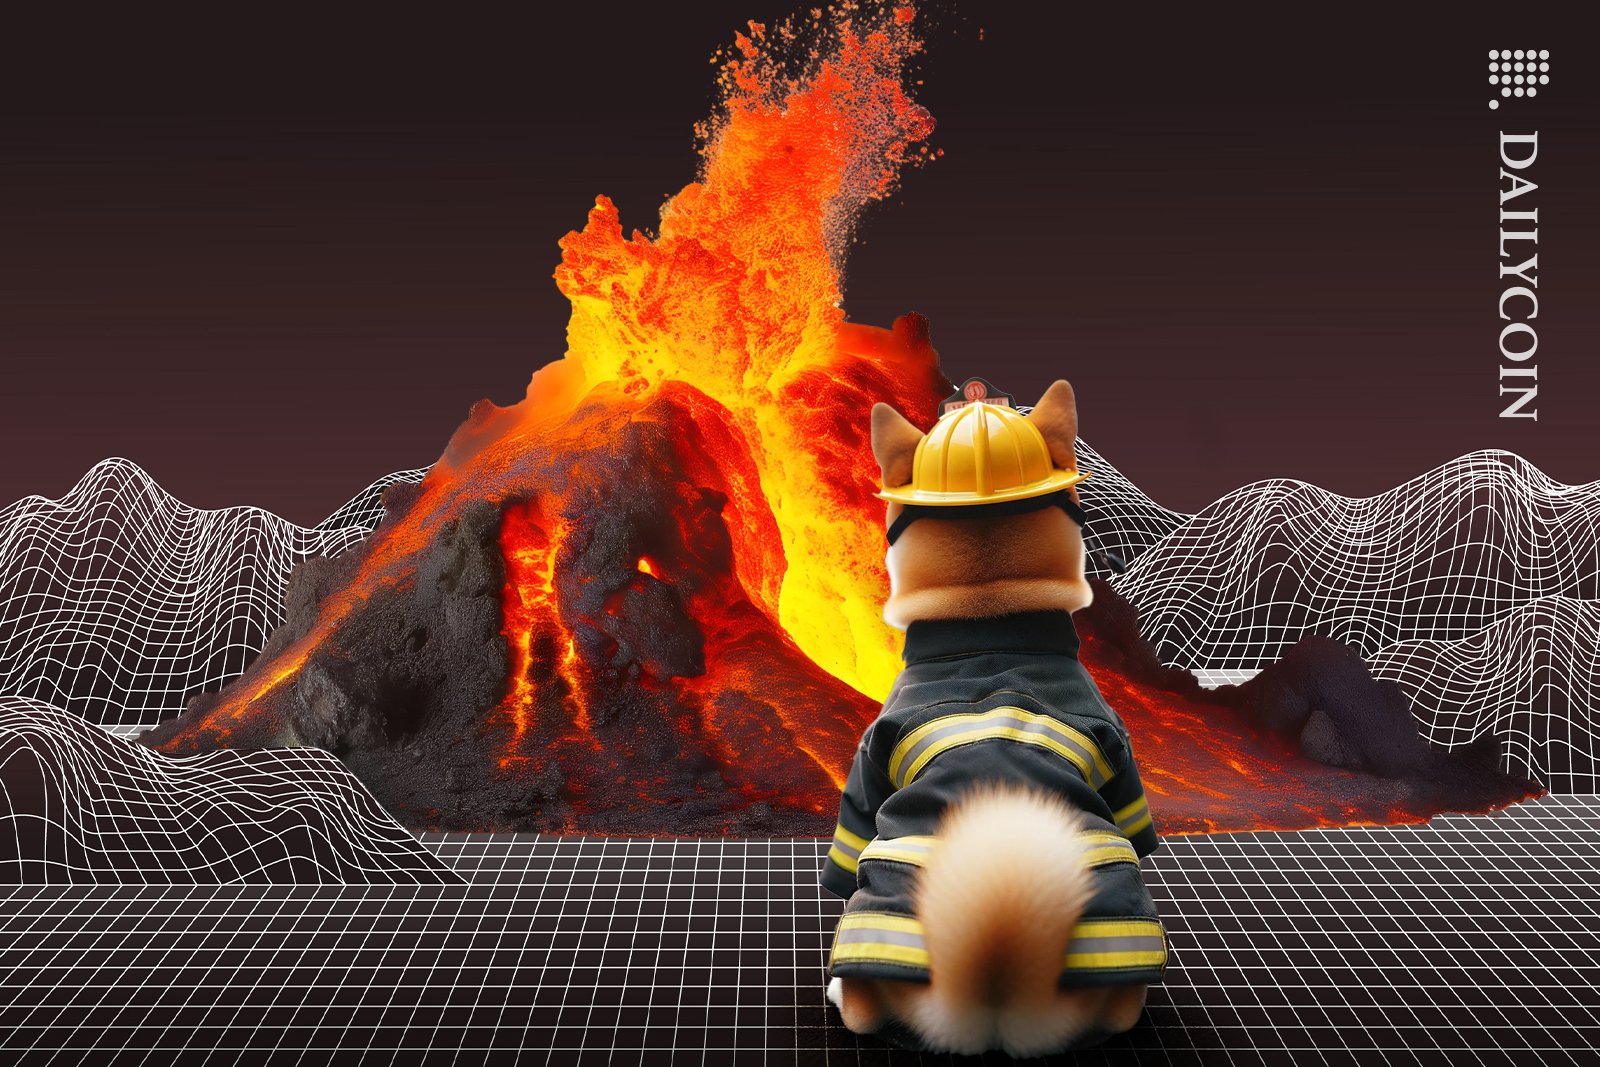 Shiba inu watches its land being run by hot lava.